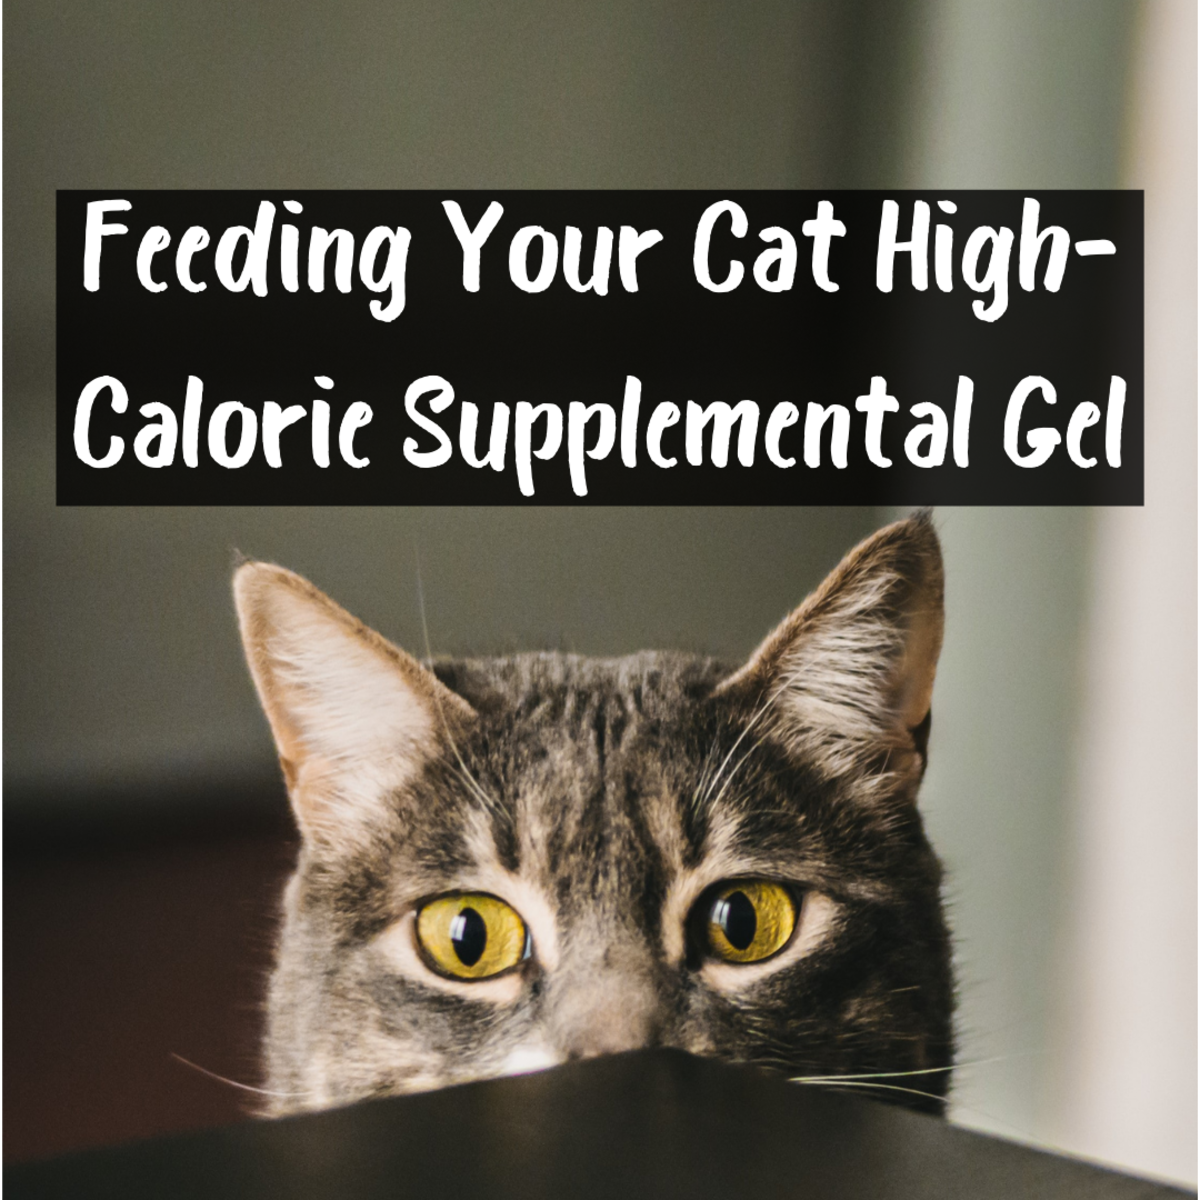 High calorie gel for cats, such as NutriCal, is sometimes necessary for keeping sick cats healthy, as sick felines do not eat enough at times.